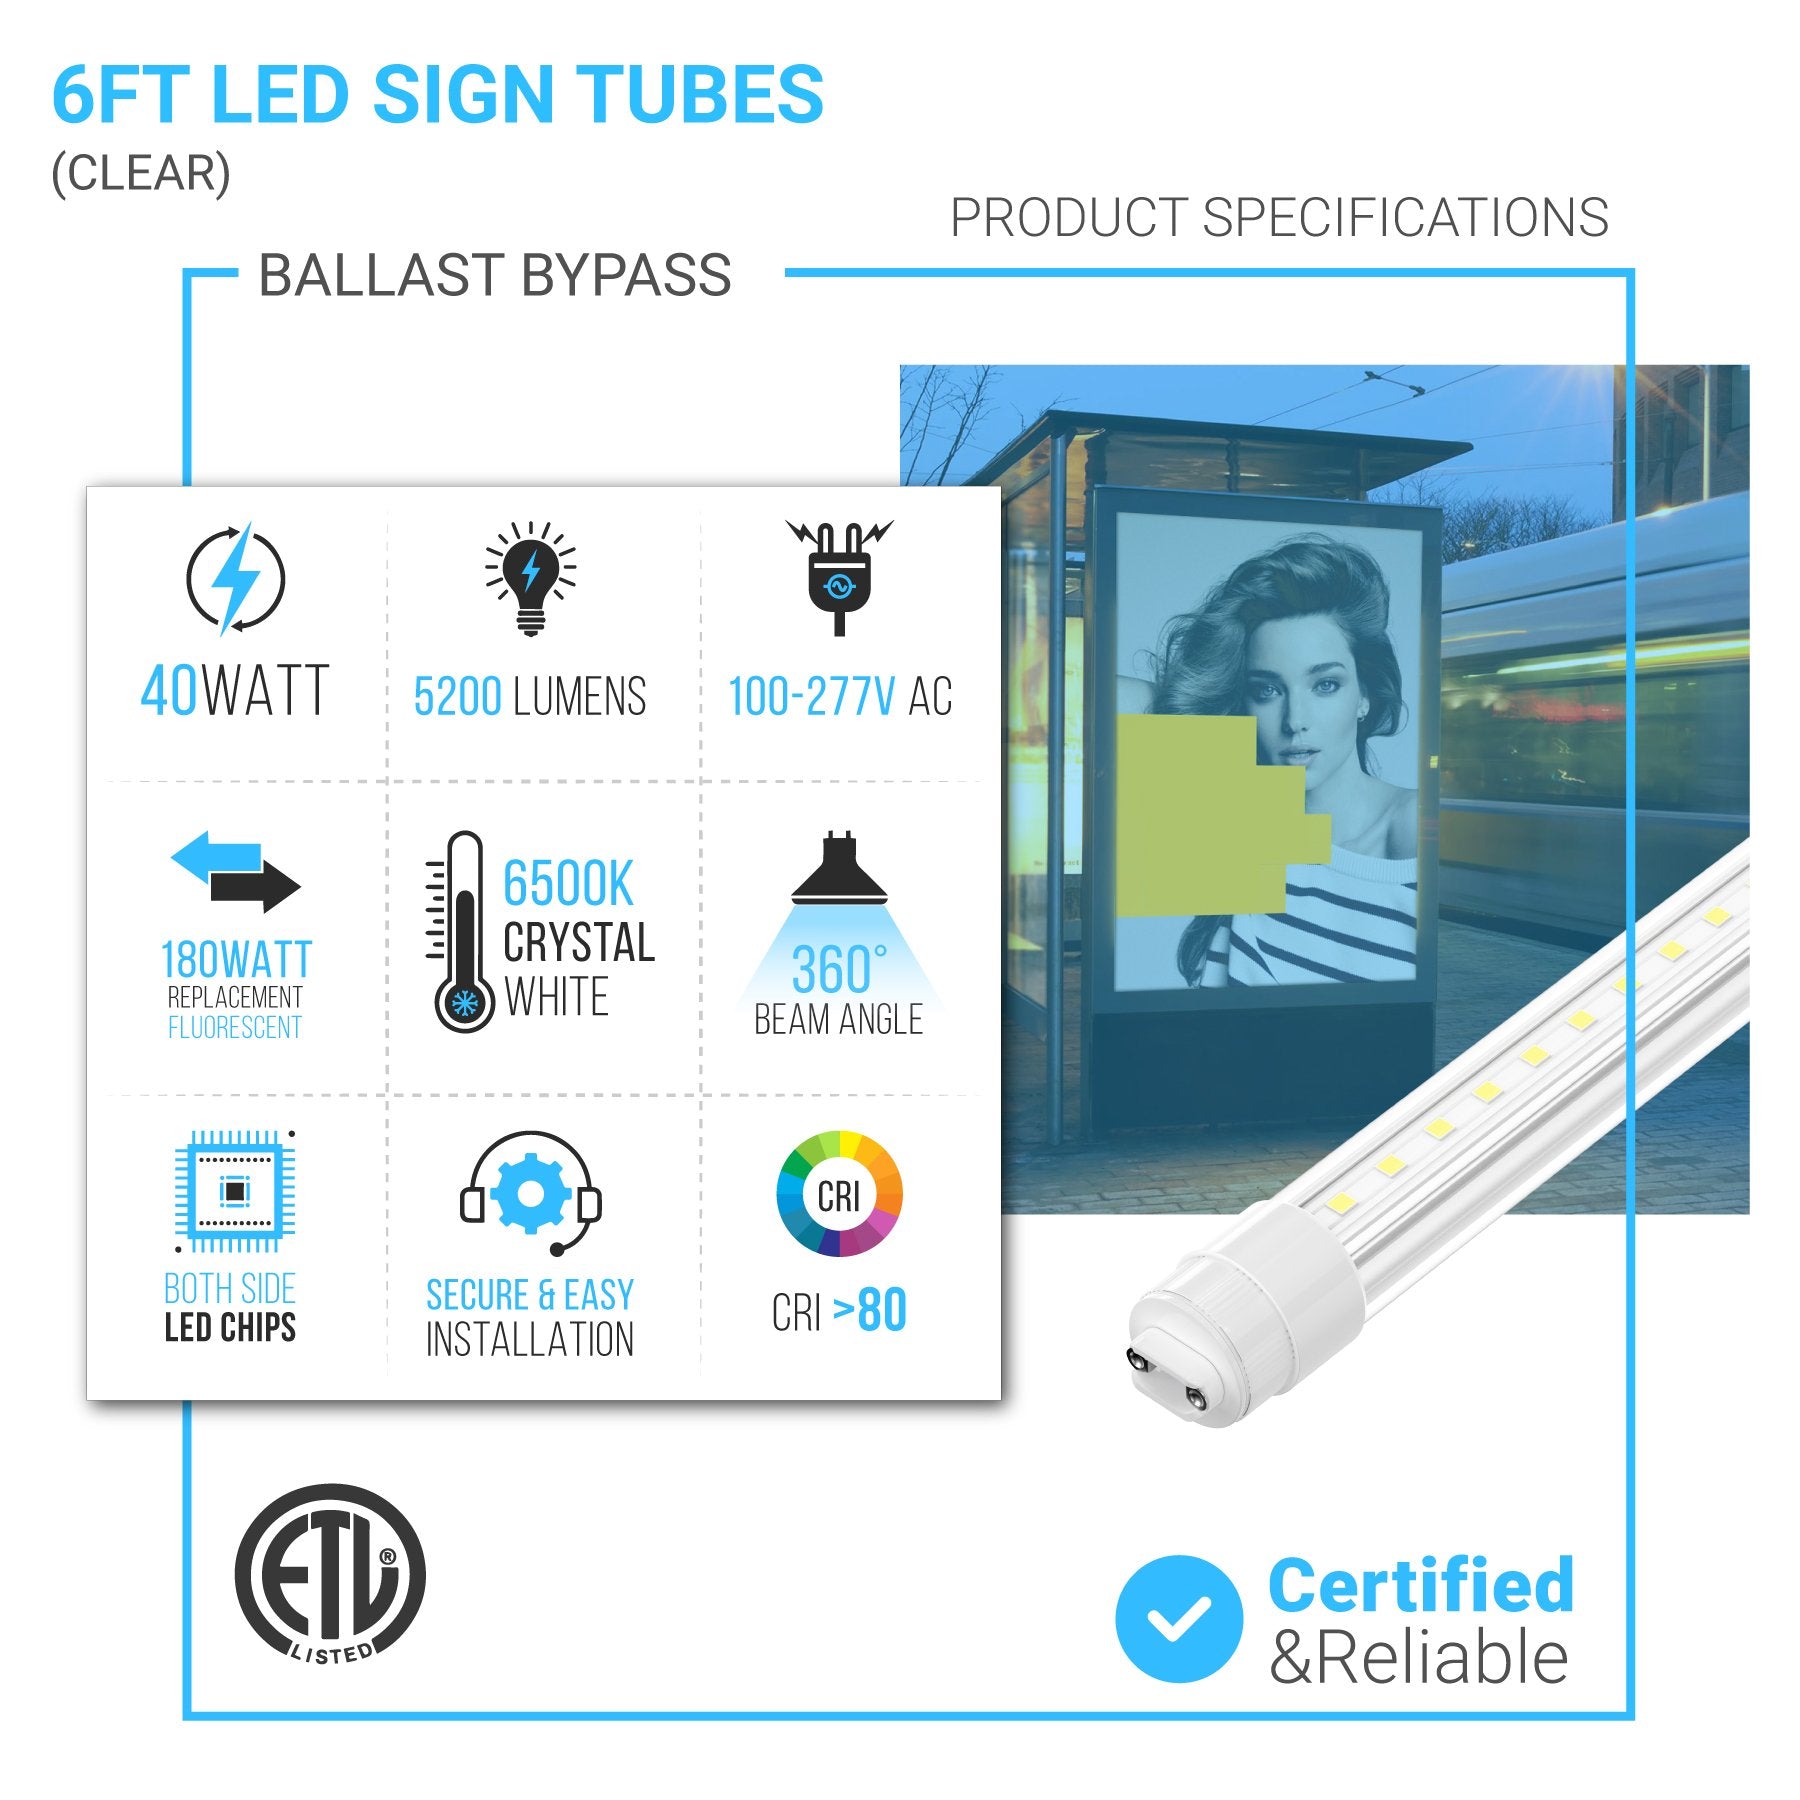 t8-led-sign-tubes-with-r17-base-ballast-bypass-rotatable-advertisement-lighting